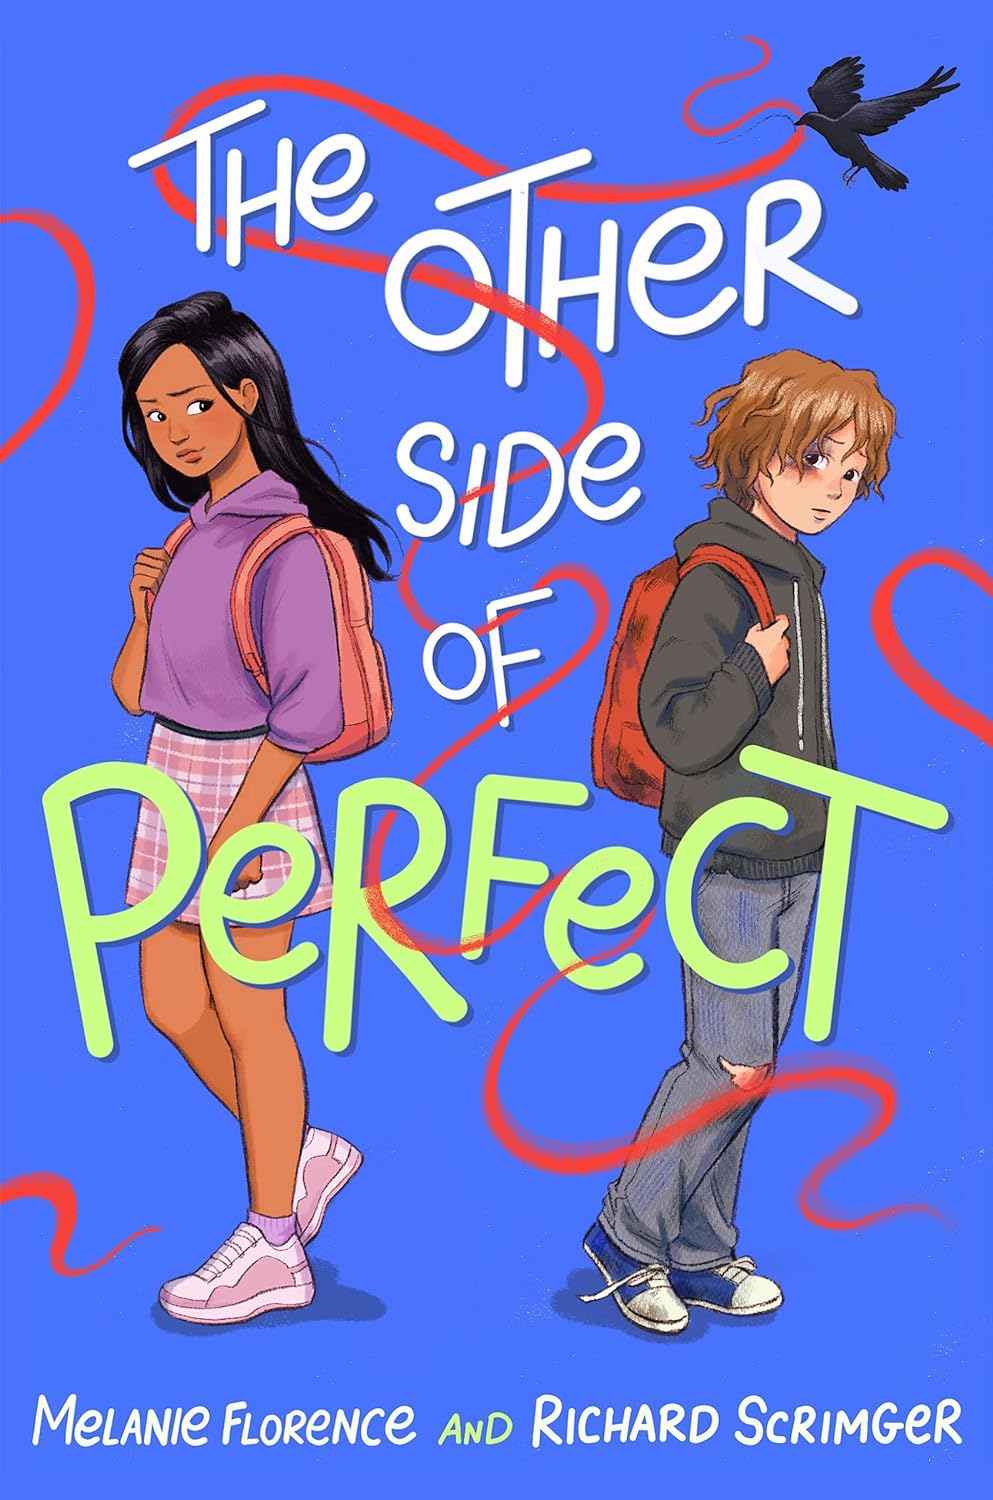 The Other Side of Perfect by Melanie Florence & Richard Scrimger